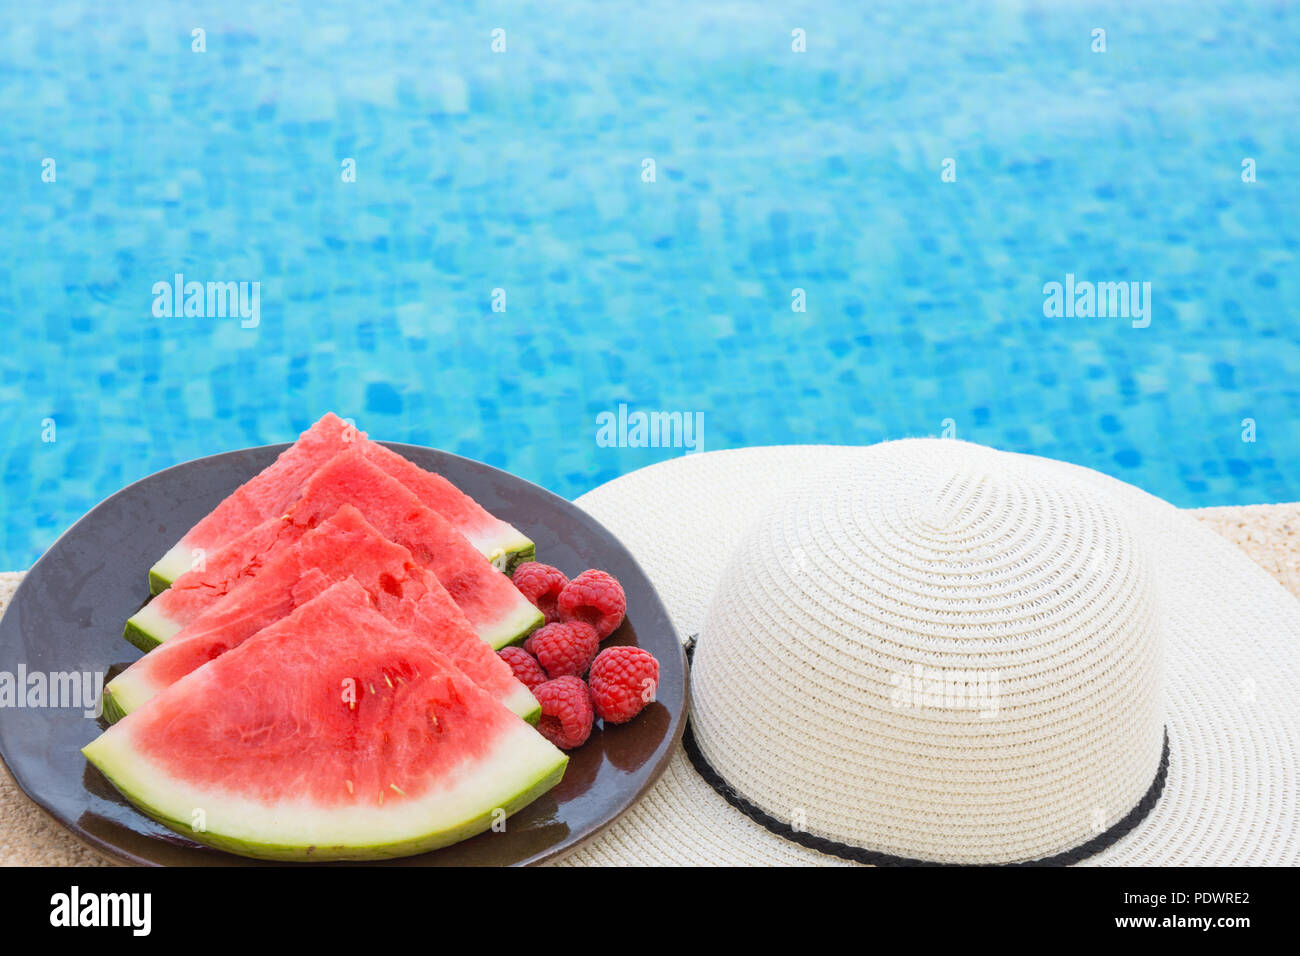 Wedges of Ripe Juicy Seedless Watermelon Raspberries on Plate on Rattan Table by Swimming Pool. Vacation Relaxation Summer Vibes. Authentic Atmosphere Stock Photo